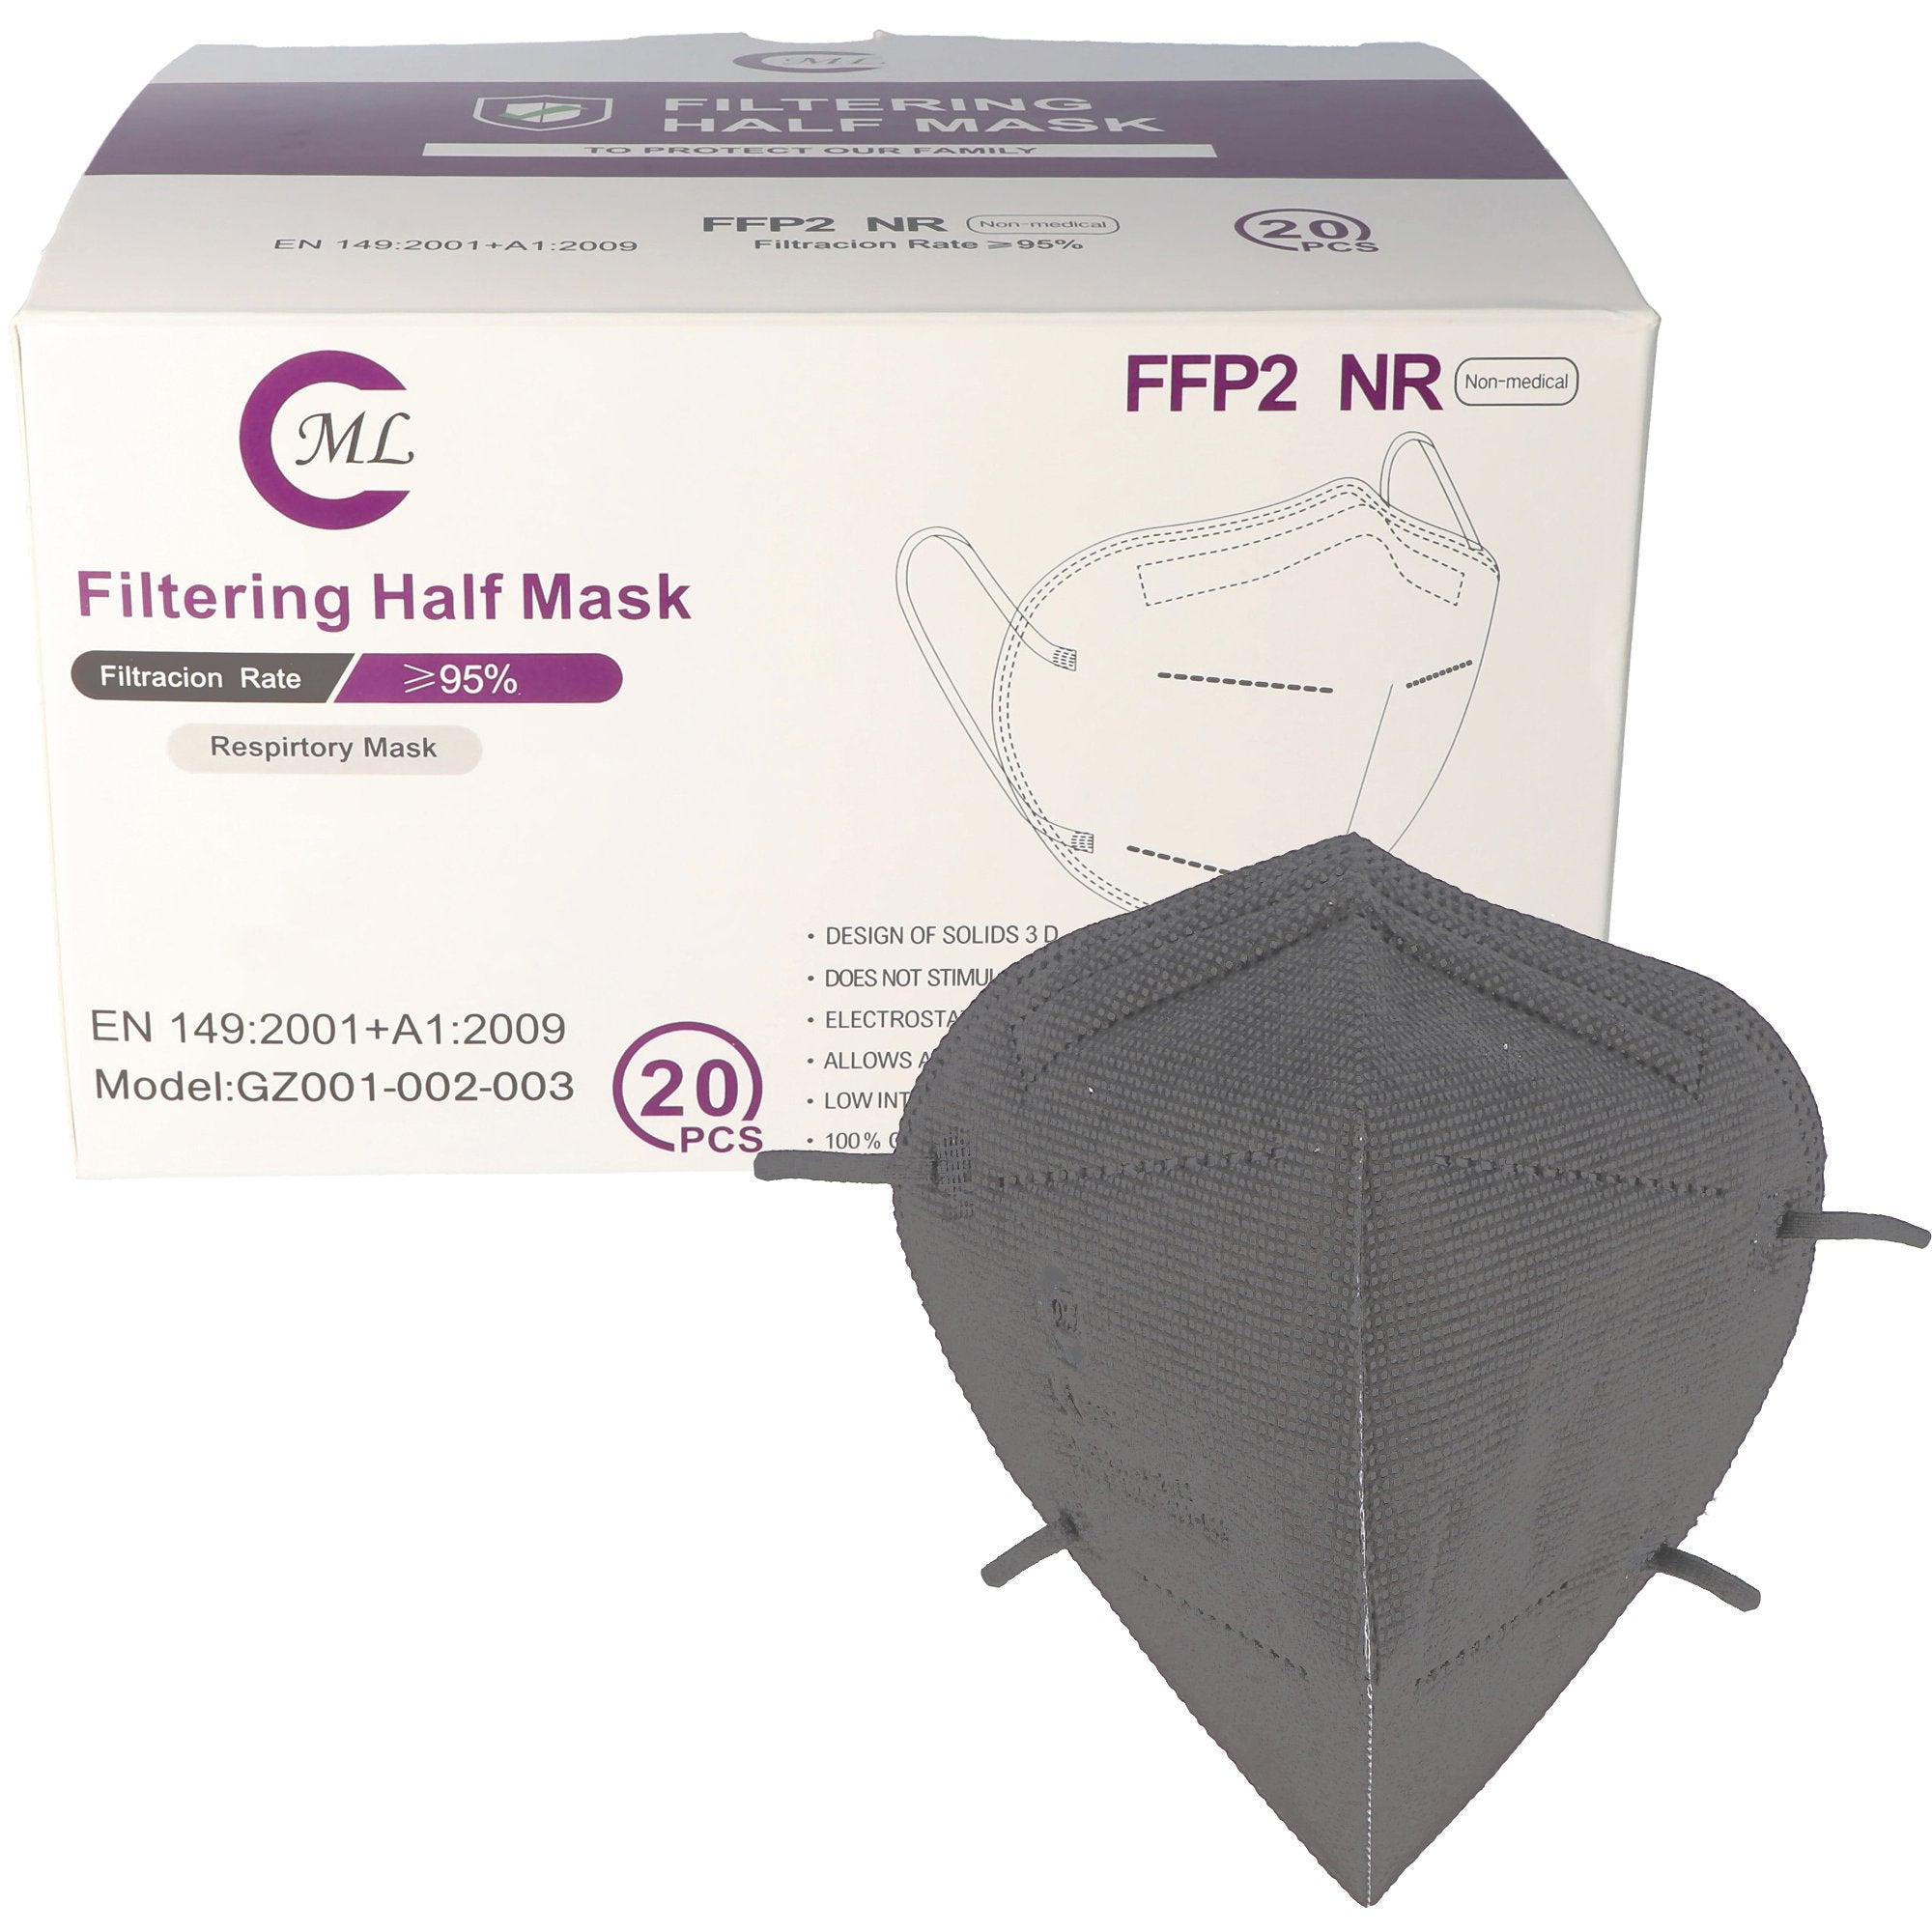 20 pieces FFP2 mask gray 5-layer, certified according to DIN EN149: 2001 + A1: 2009, particle filter